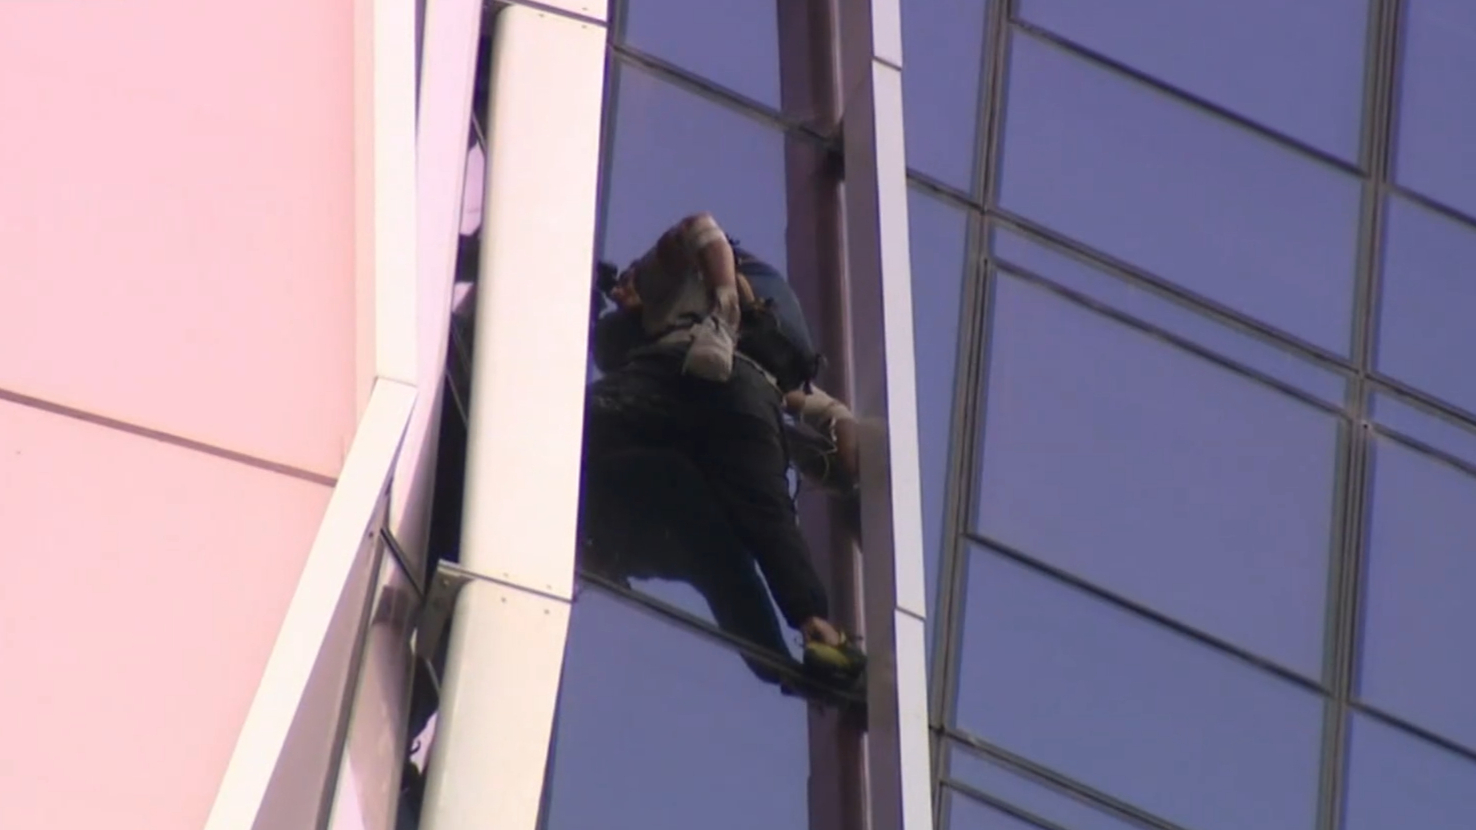 French Spiderman admits he’d climb Melbourne building again